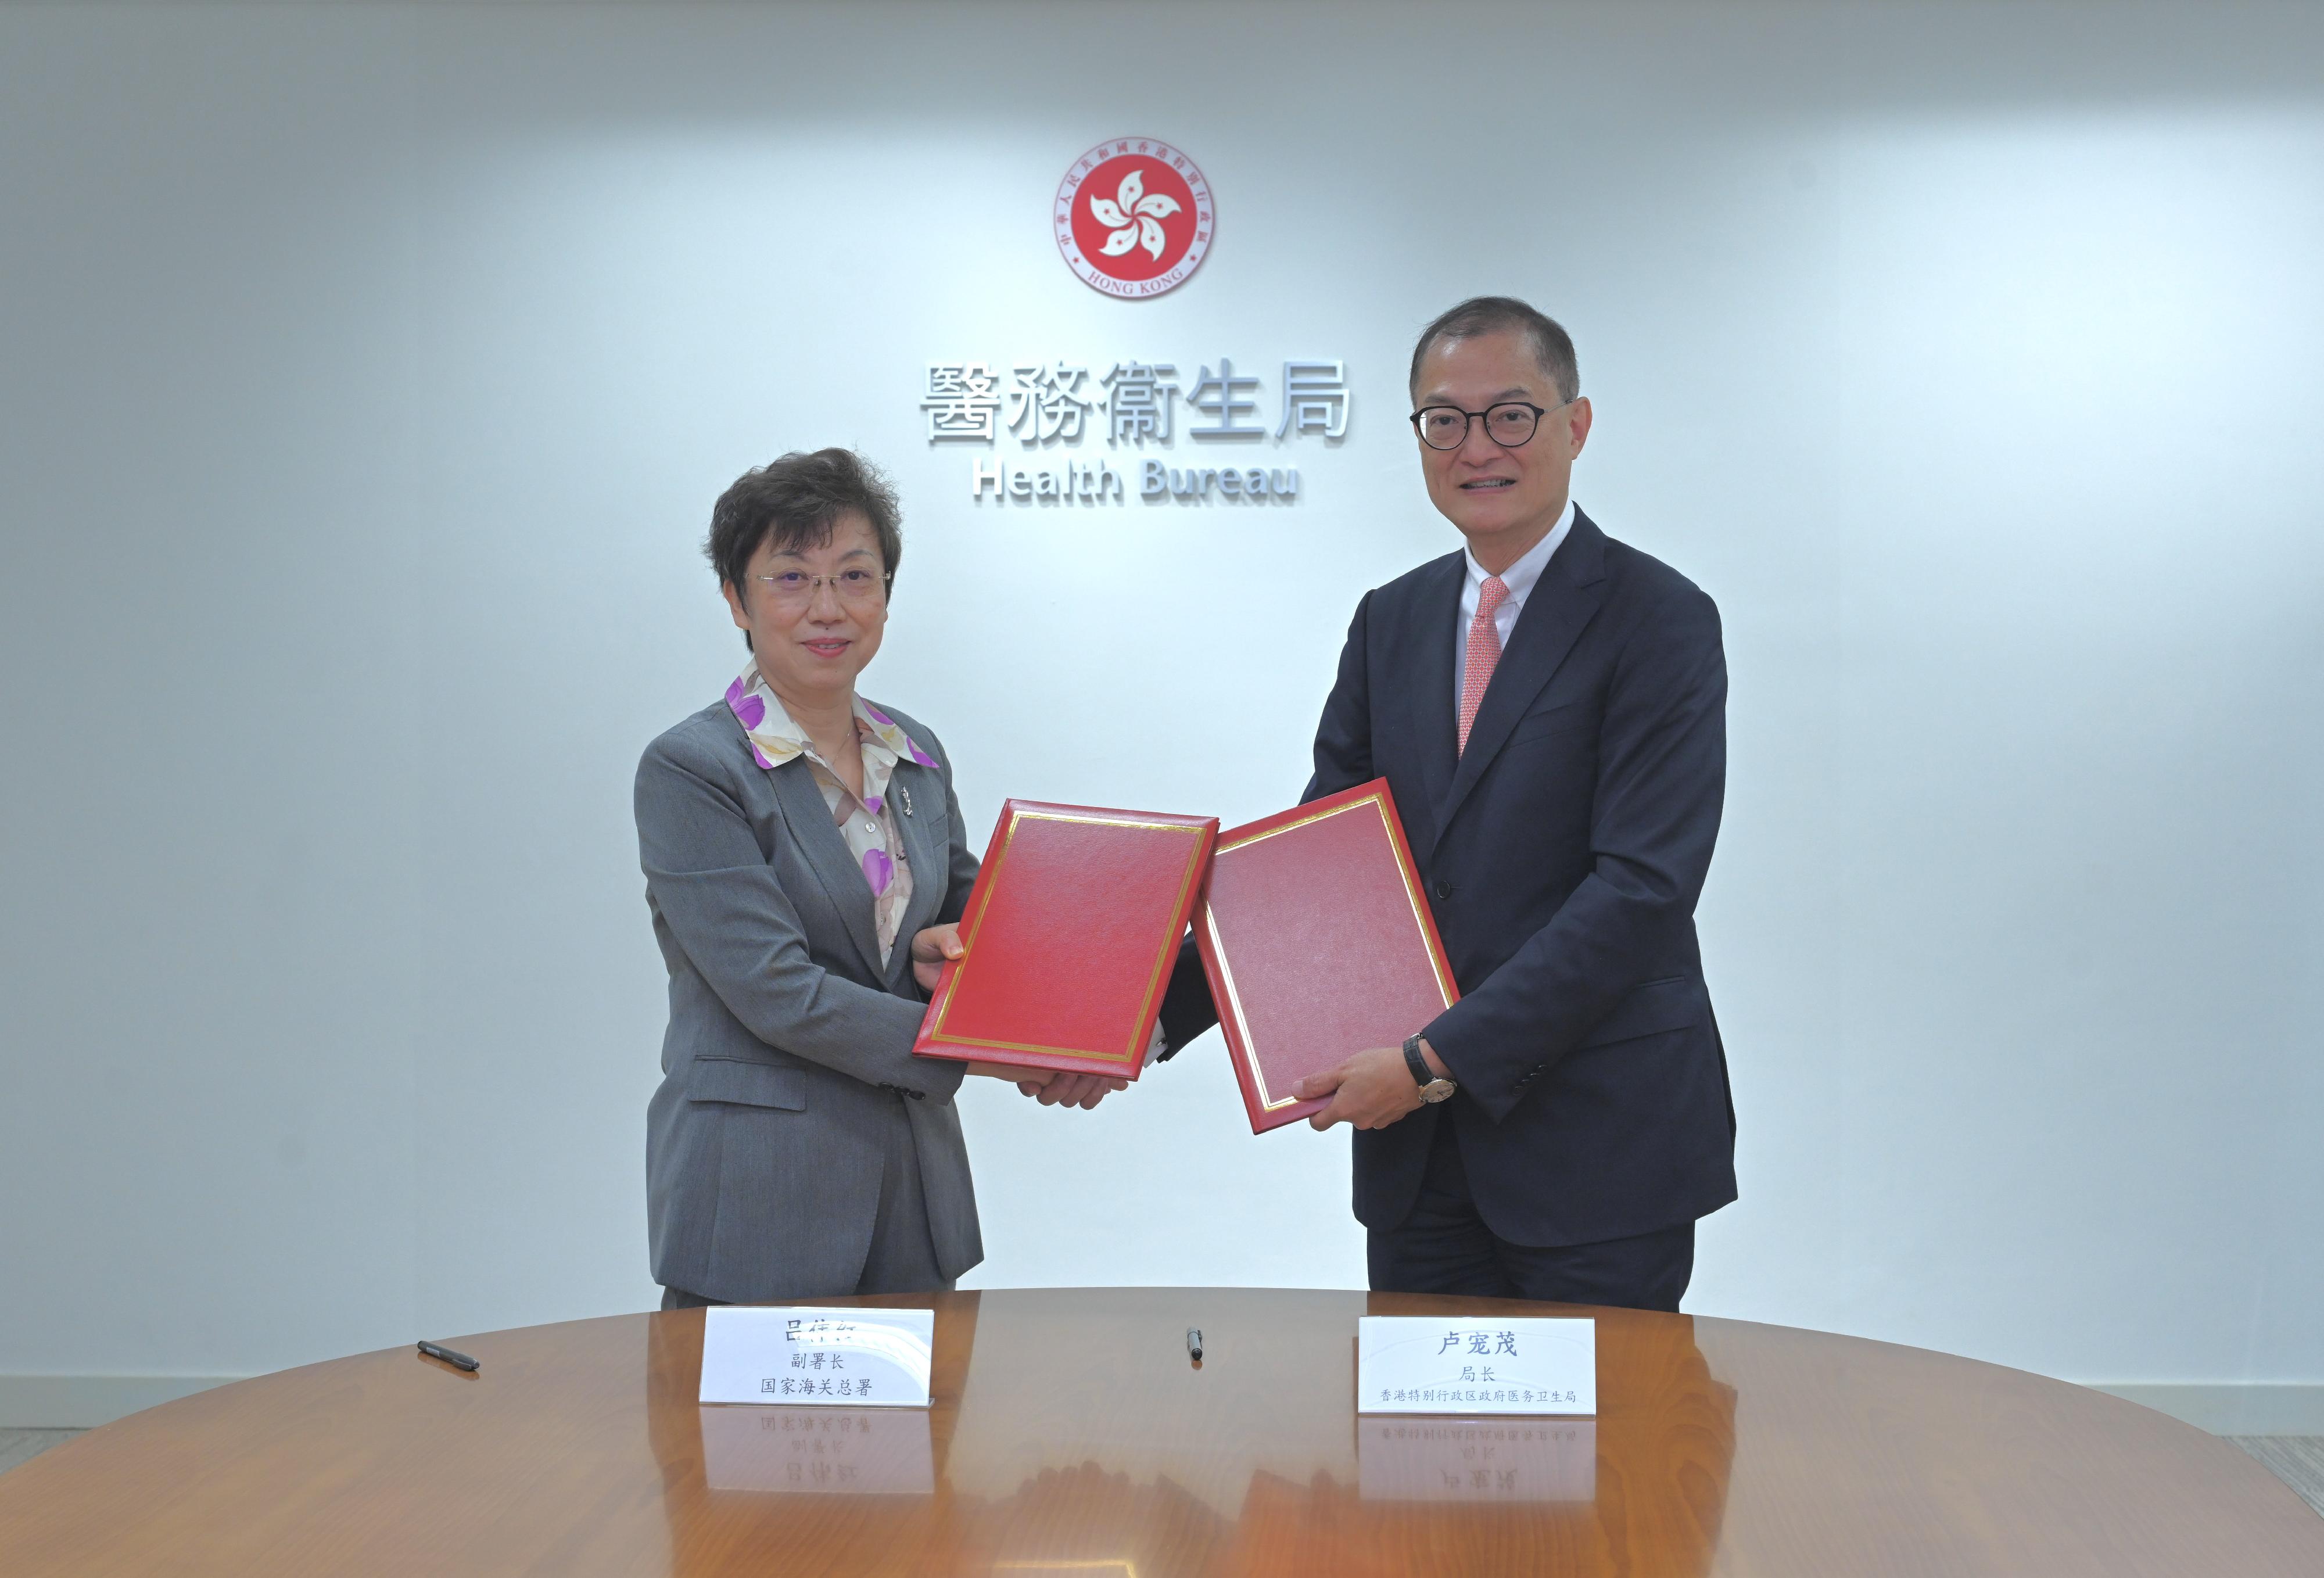 The Secretary for Health, Professor Lo Chung-mau (right), and Vice Minister of General Administration of Customs of the People’s Republic of China (GACC) Ms Lv Weihong (left) sign the Co-operation Arrangement for Entry-exit Health Inspection and Quarantine between the GACC and the Health Bureau of the Hong Kong Special Administrative Region Government today (November 28).